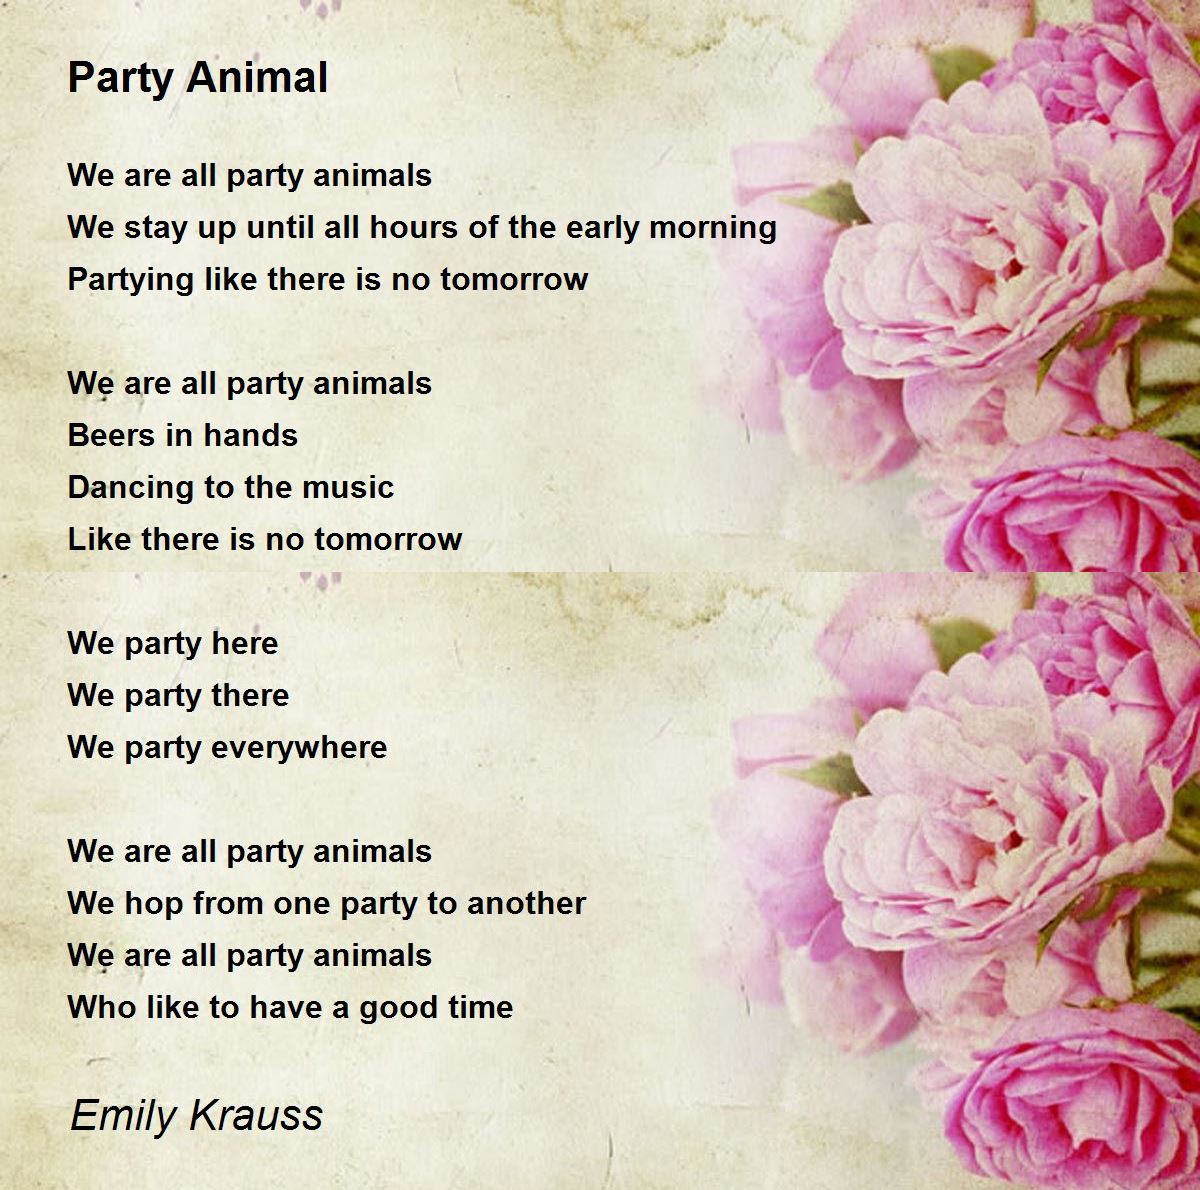 Party Animal - Party Animal Poem by Emily Krauss